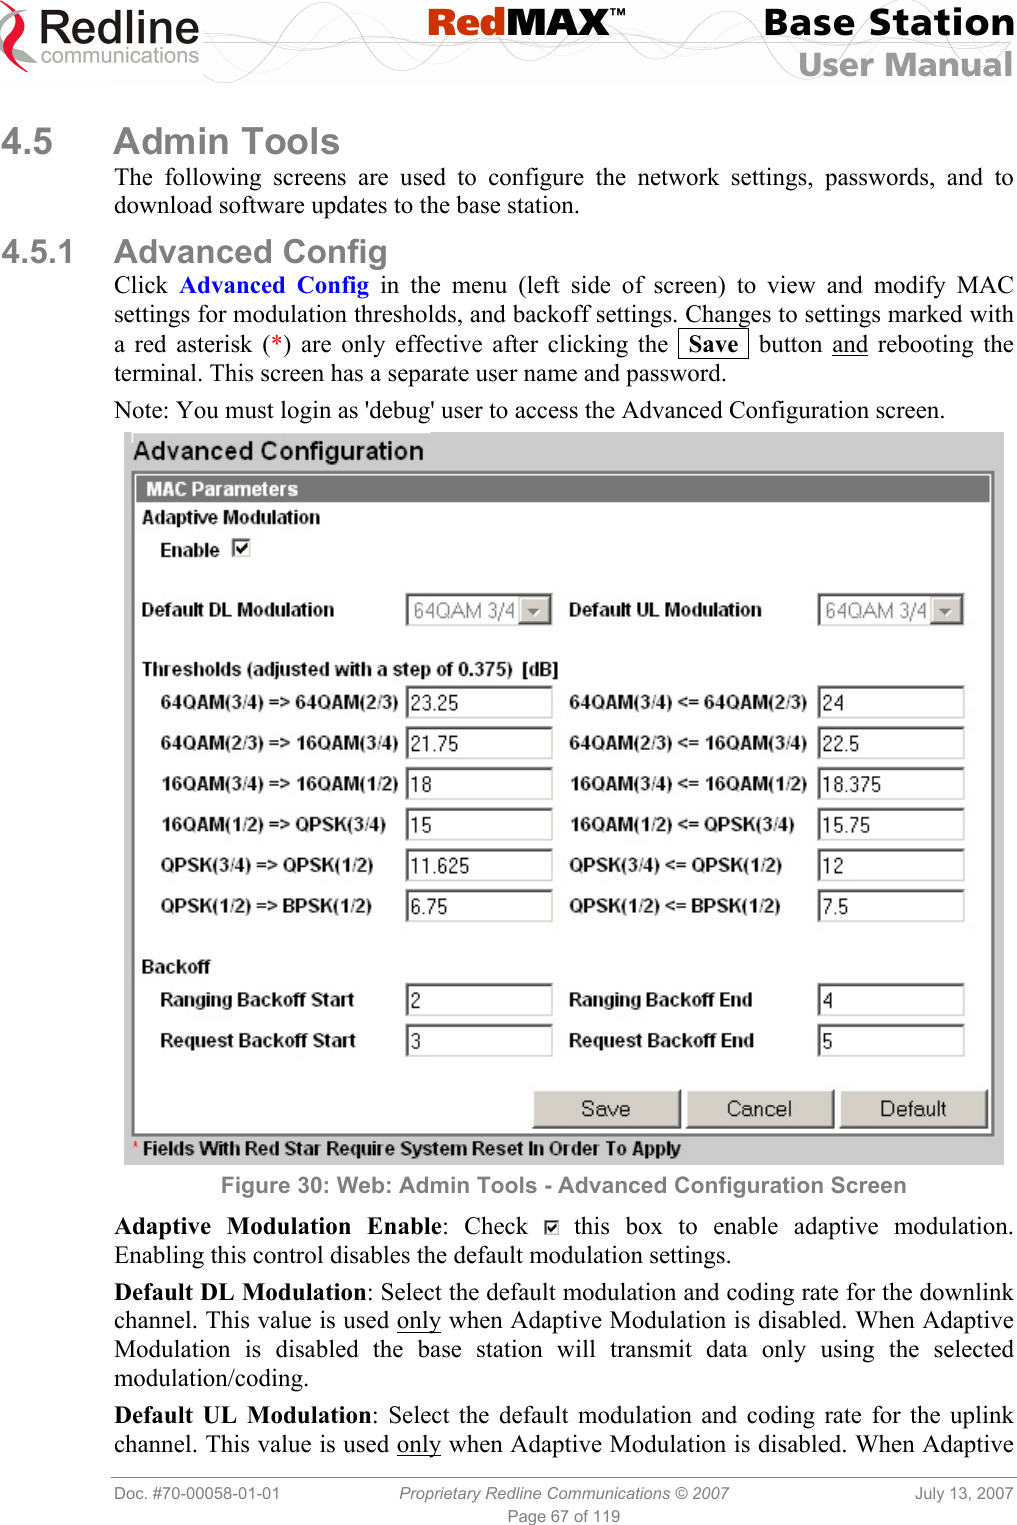  RedMAX™ Base Station User Manual   Doc. #70-00058-01-01  Proprietary Redline Communications © 2007  July 13, 2007 Page 67 of 119  4.5 Admin Tools The following screens are used to configure the network settings, passwords, and to download software updates to the base station. 4.5.1 Advanced Config Click  Advanced Config in the menu (left side of screen) to view and modify MAC settings for modulation thresholds, and backoff settings. Changes to settings marked with a red asterisk (*) are only effective after clicking the  Save  button and rebooting the terminal. This screen has a separate user name and password. Note: You must login as &apos;debug&apos; user to access the Advanced Configuration screen.  Figure 30: Web: Admin Tools - Advanced Configuration Screen Adaptive Modulation Enable: Check   this box to enable adaptive modulation. Enabling this control disables the default modulation settings. Default DL Modulation: Select the default modulation and coding rate for the downlink channel. This value is used only when Adaptive Modulation is disabled. When Adaptive Modulation is disabled the base station will transmit data only using the selected modulation/coding. Default UL Modulation: Select the default modulation and coding rate for the uplink channel. This value is used only when Adaptive Modulation is disabled. When Adaptive 